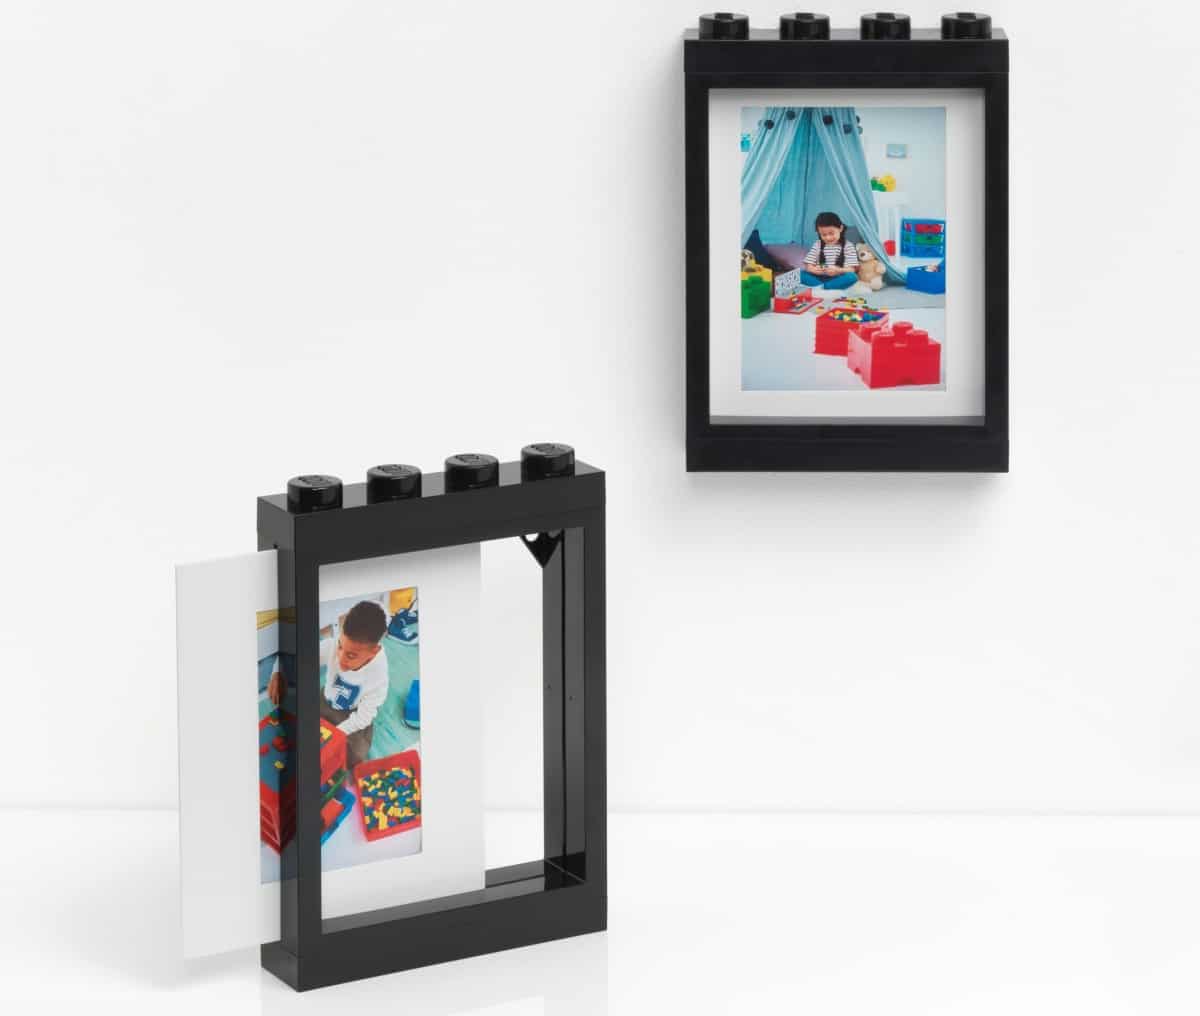 lego 5006215 picture frame scaled